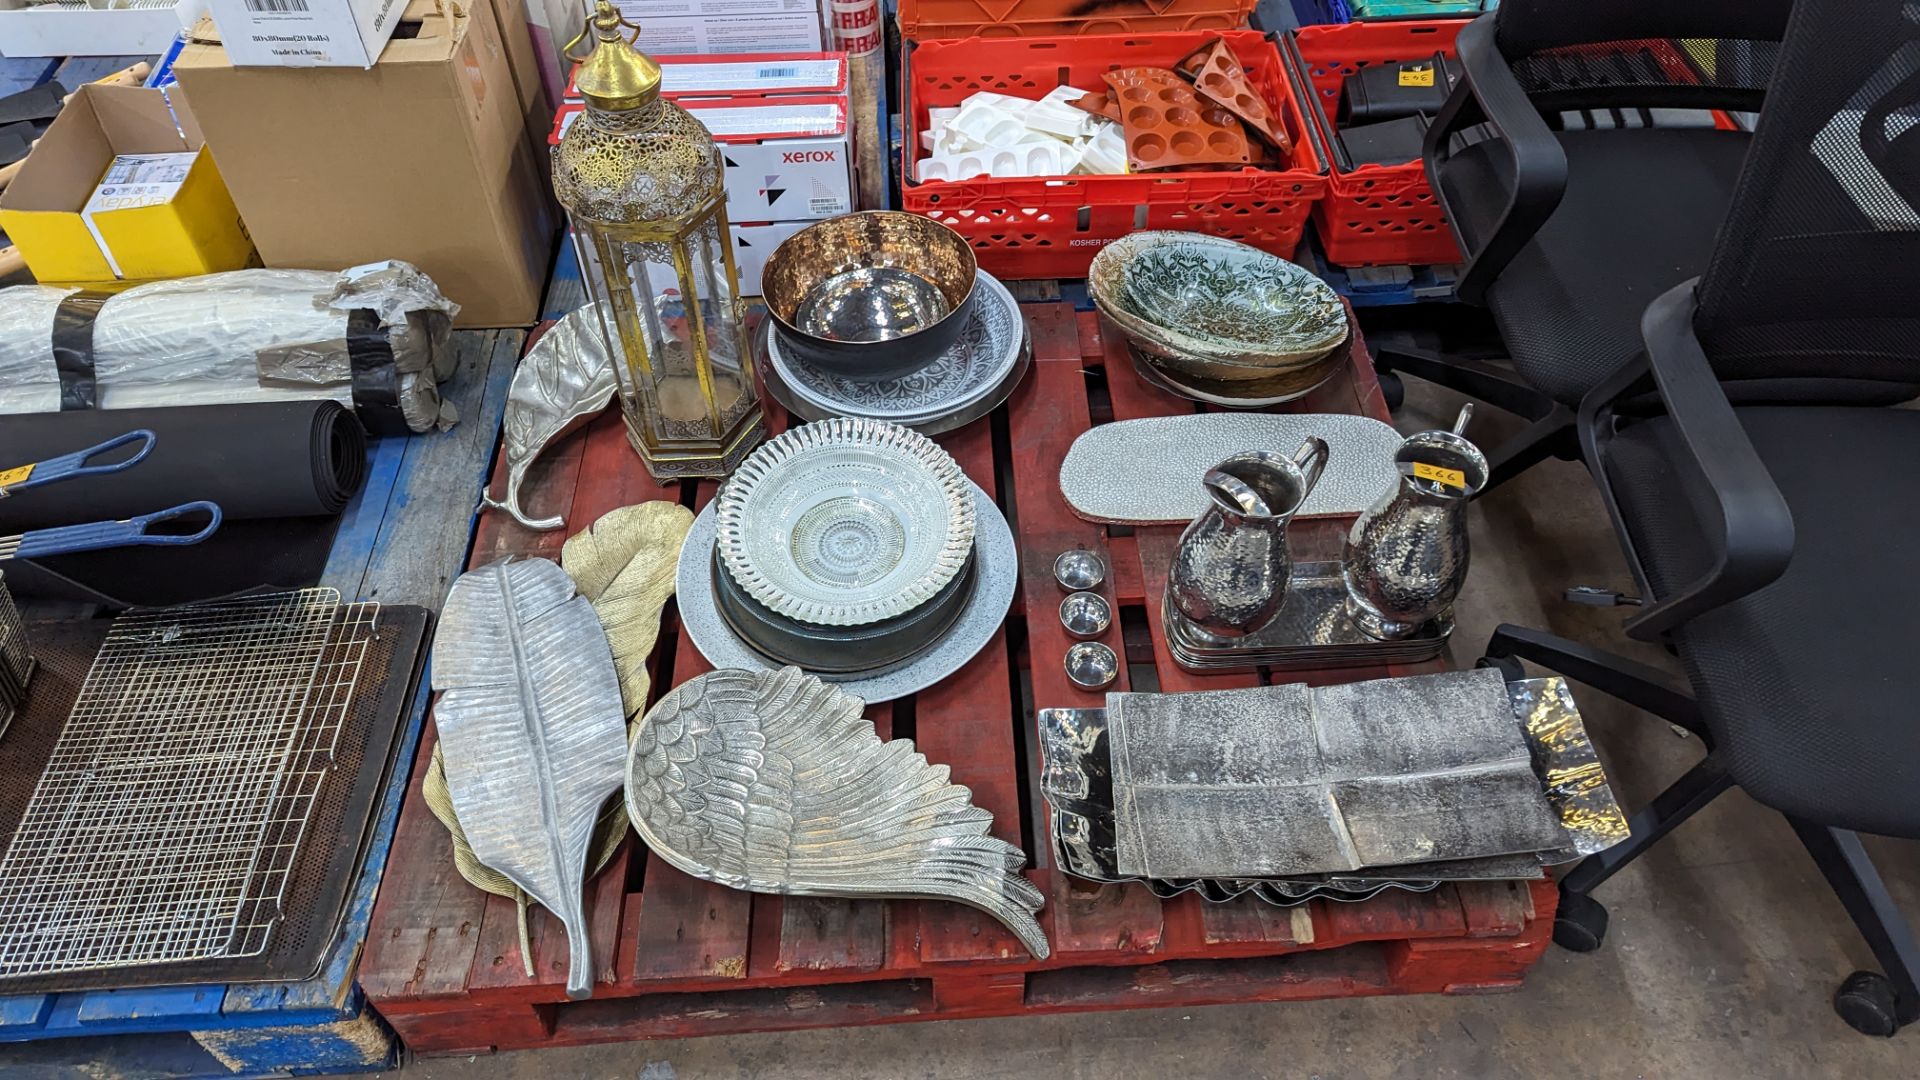 The contents of a pallet of decorative items, mostly with Middle Eastern inspiration